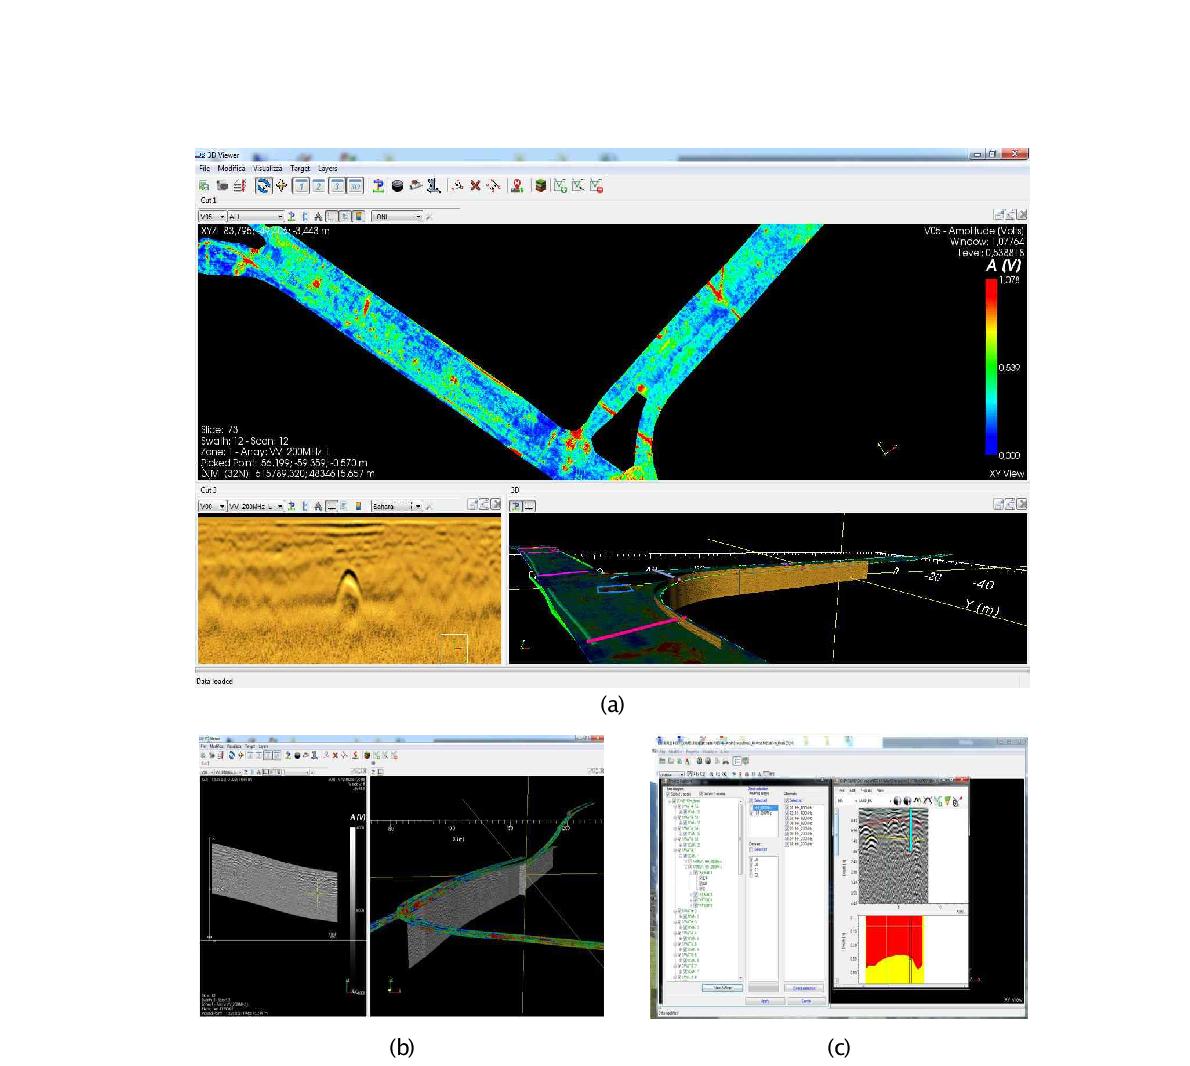 (a) GRED HD 3D viewer image showing tomographic, radar scan and 3D model (b) GRED HD 3D viewer Radar scan and 3D views (c) Project exploration: Radar scan selection and layer picking procedure